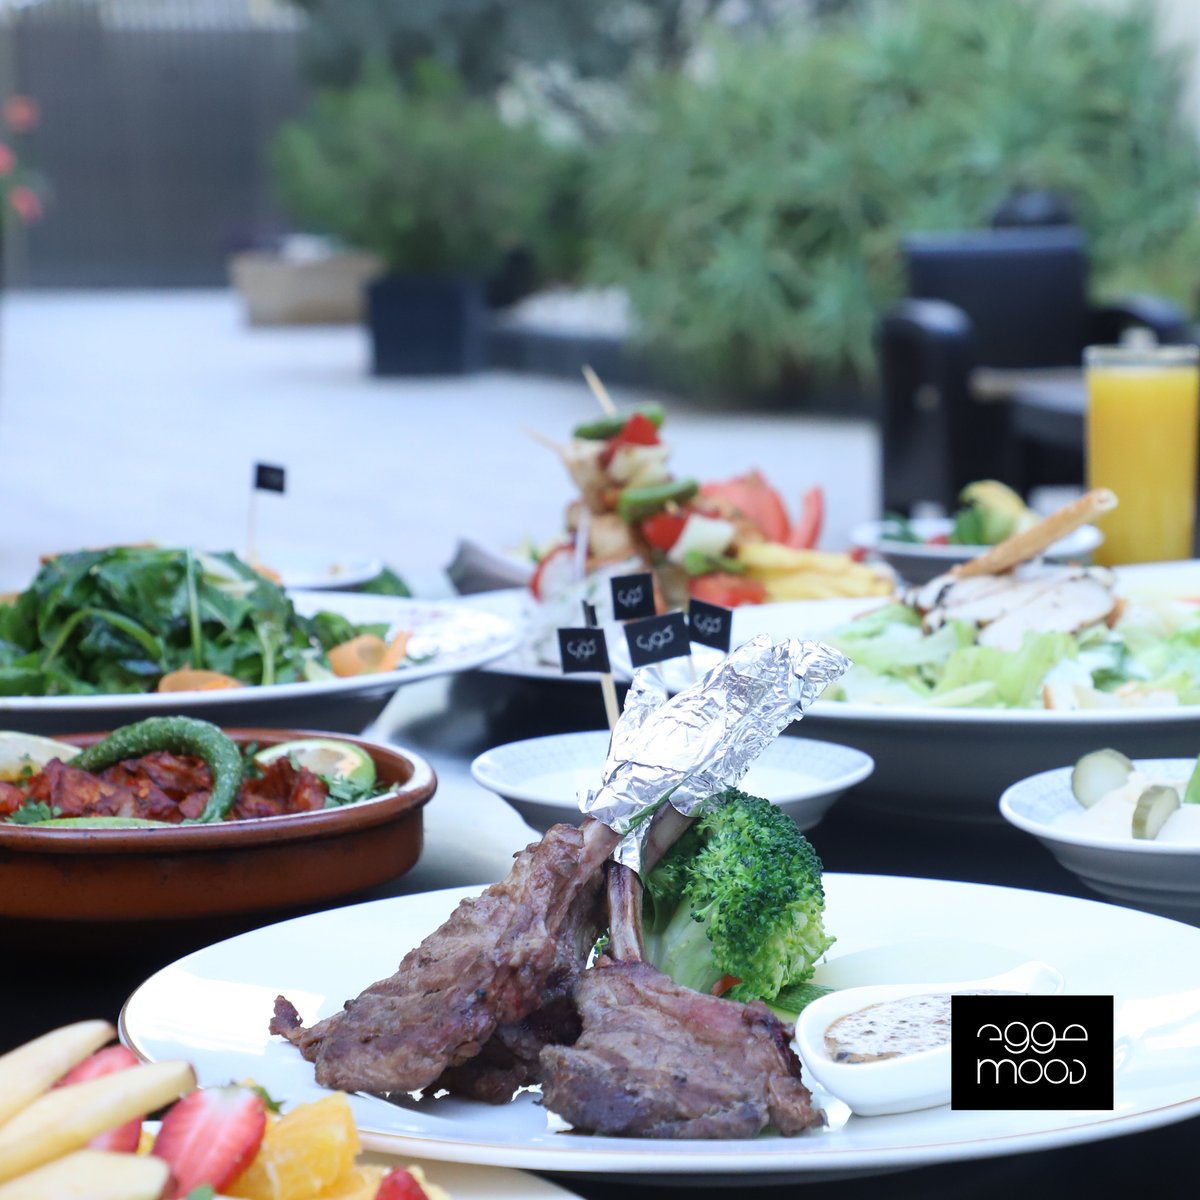 Indulge in the rich flavors of Lebanon under the open sky at our captivating restaurant & terrace. Savor every bite of our authentic Lebanese cuisine while enjoying the enchanting ambiance. 

For bookings, please call 06 5686666

#corpamman #hmhhotelgroup #amman #food #foodi